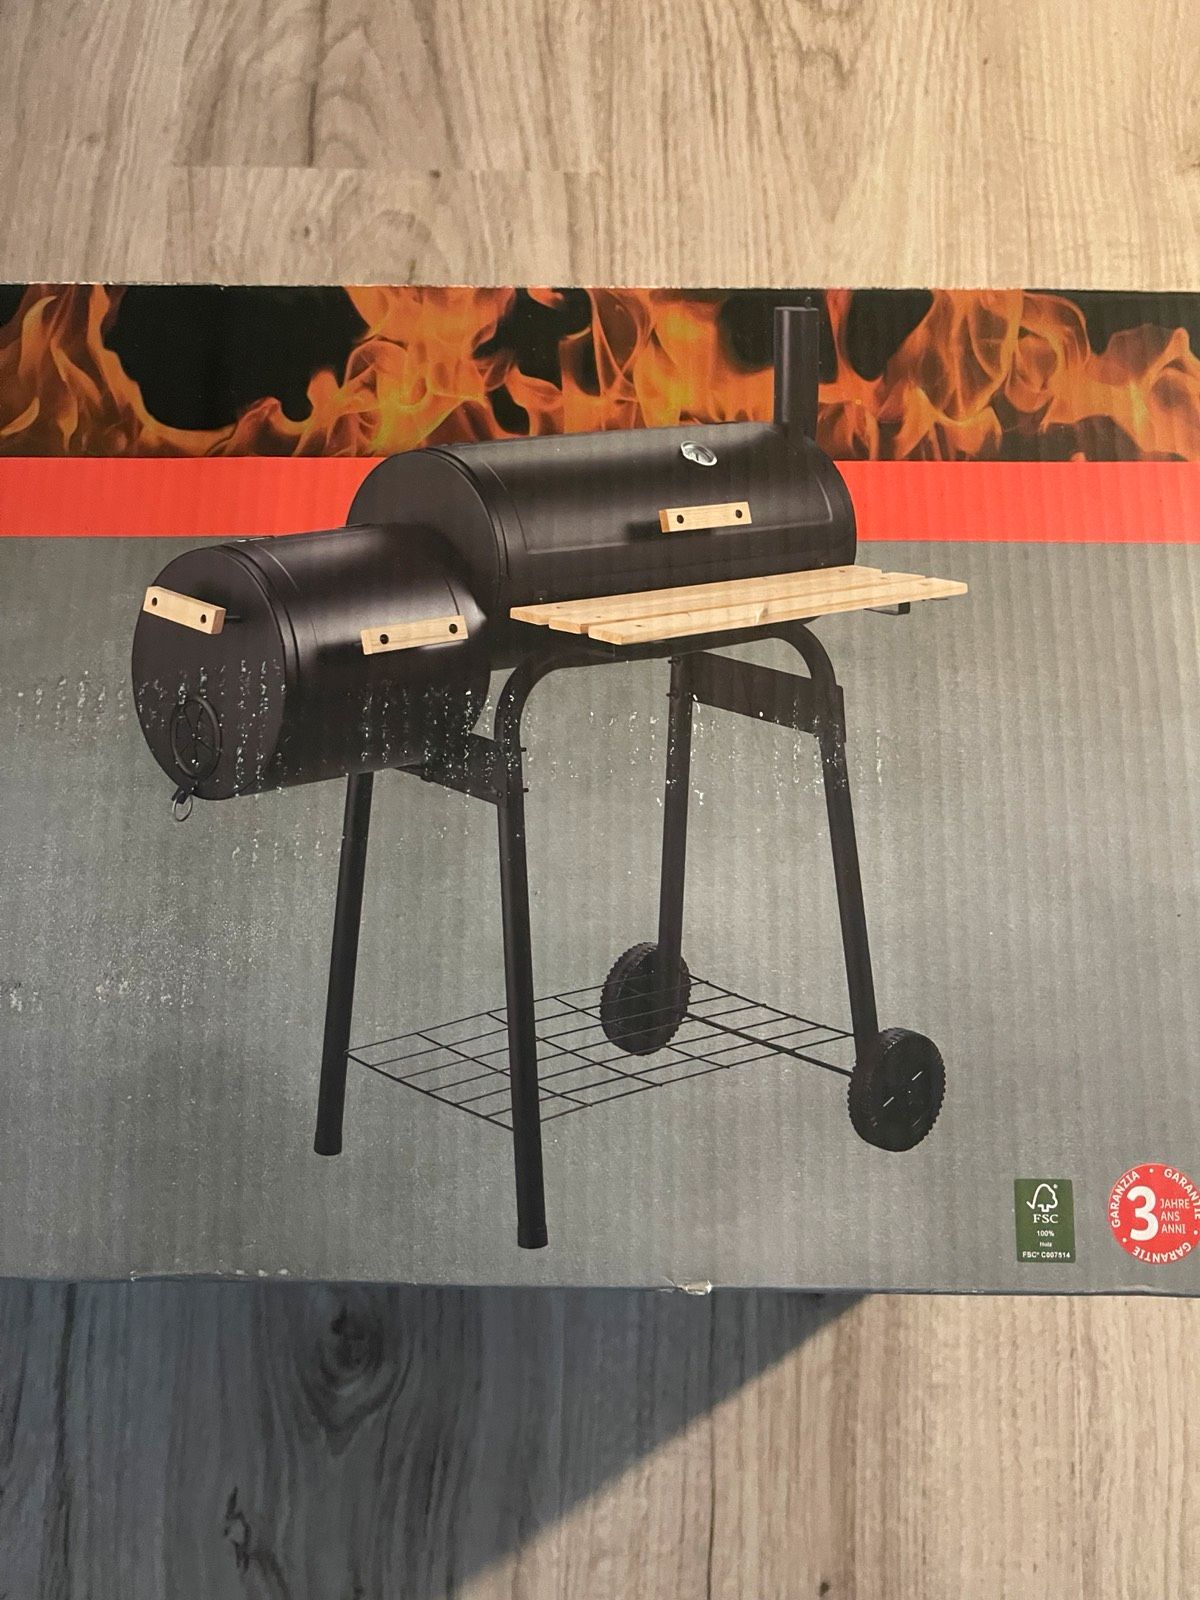 GRILLMEISTER Holzkohle-Smokergrill »GMS 92 A1«